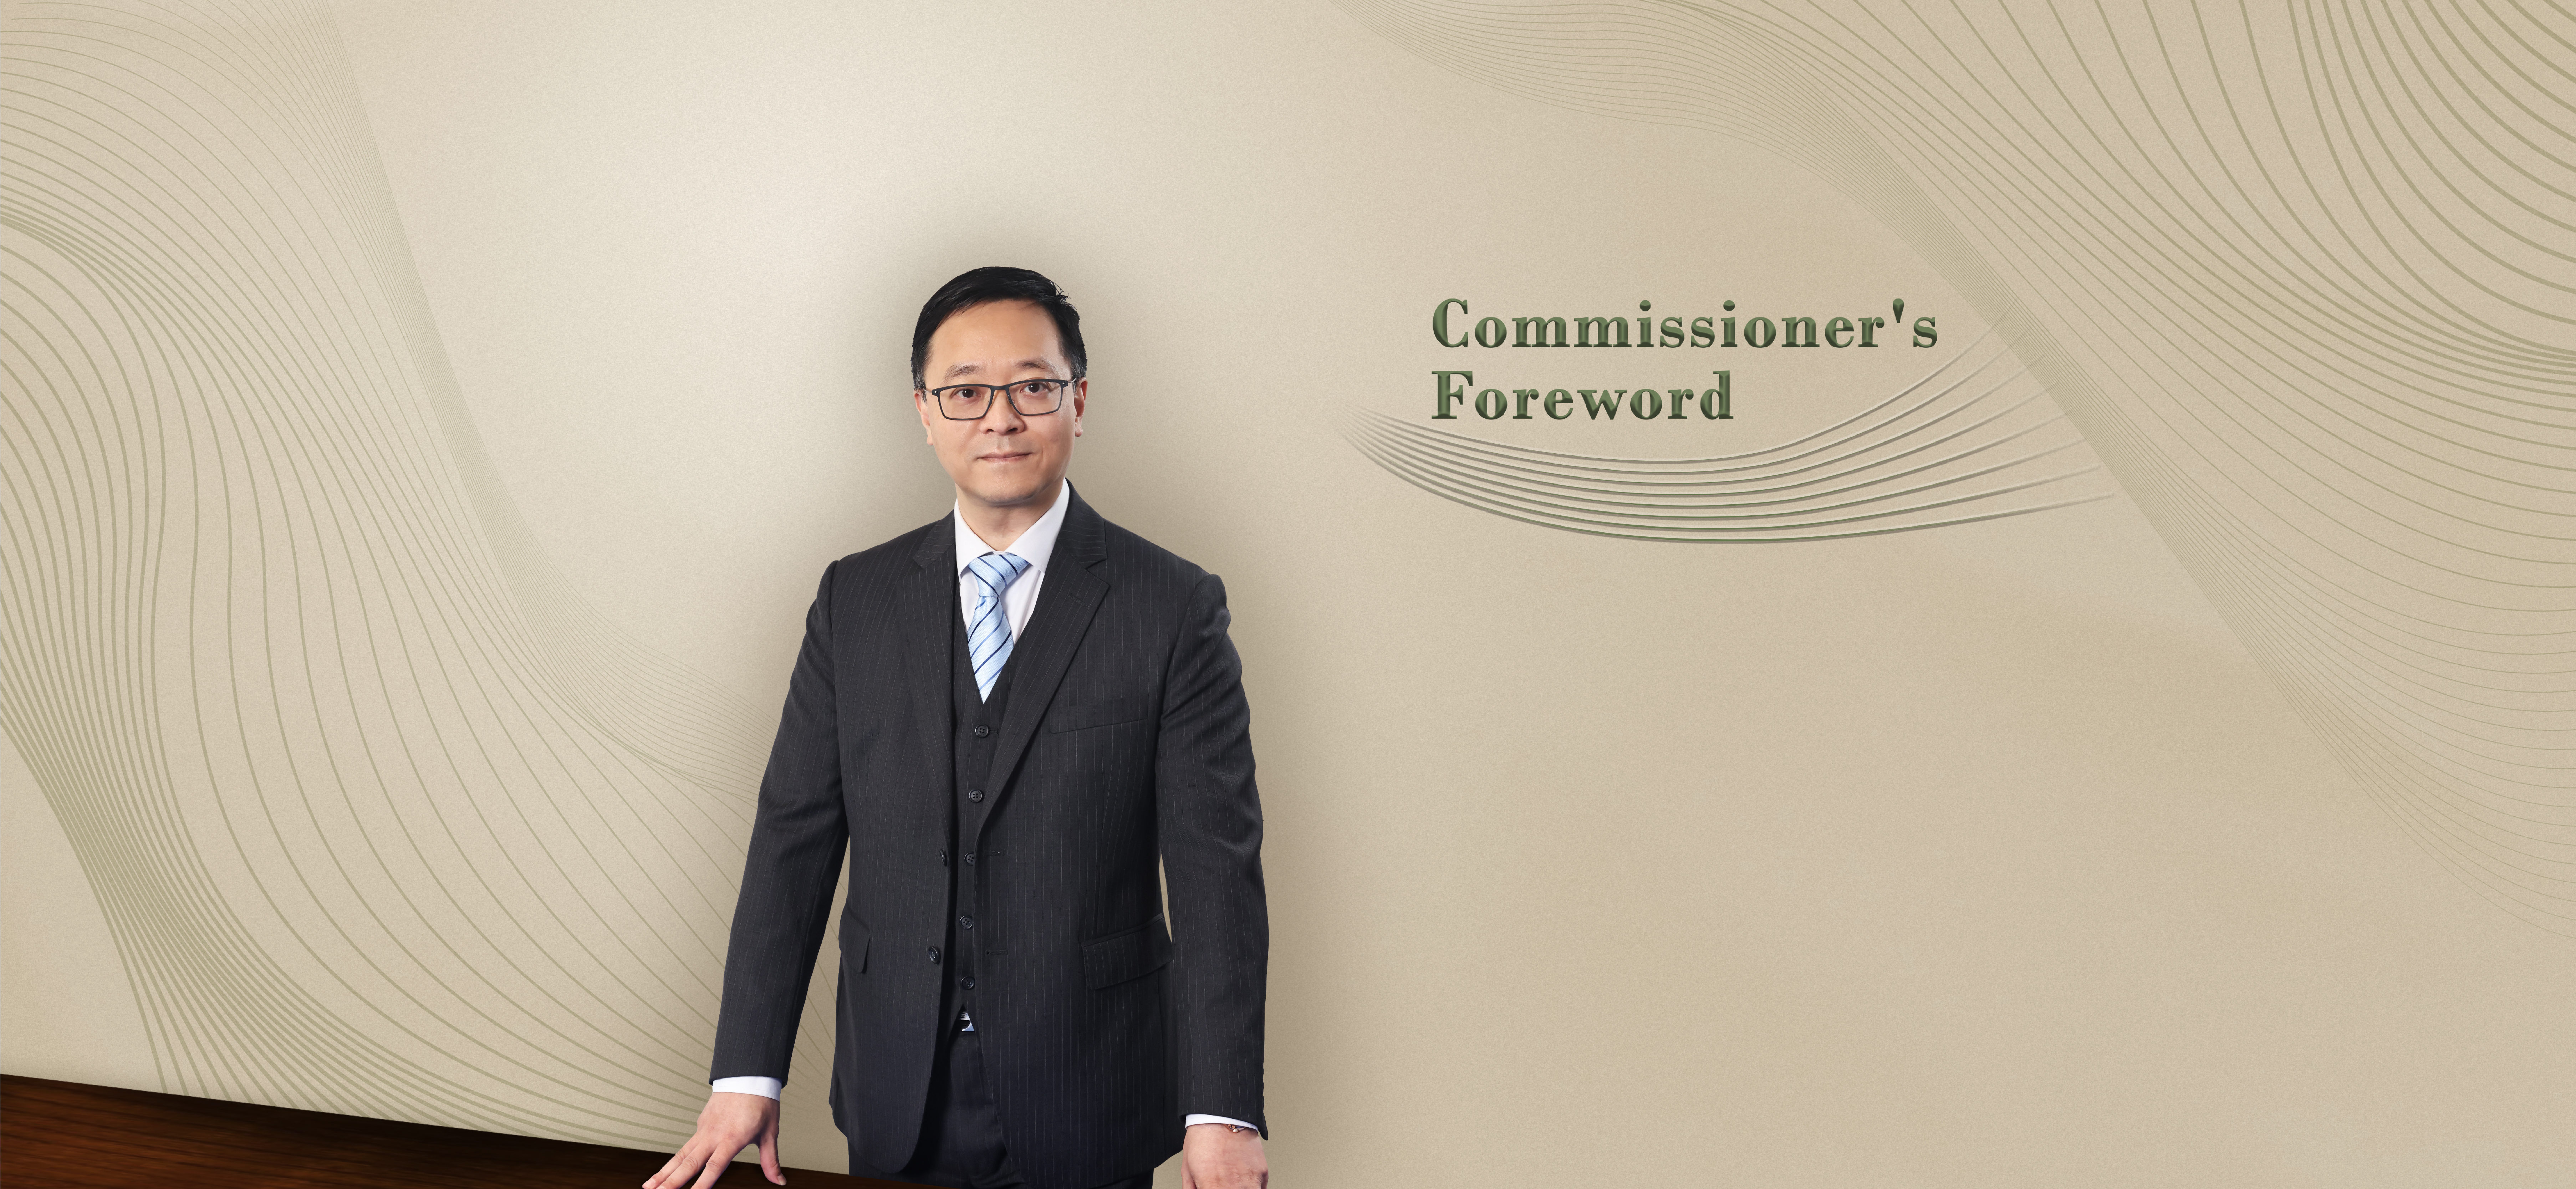 Commissioner's Foreword